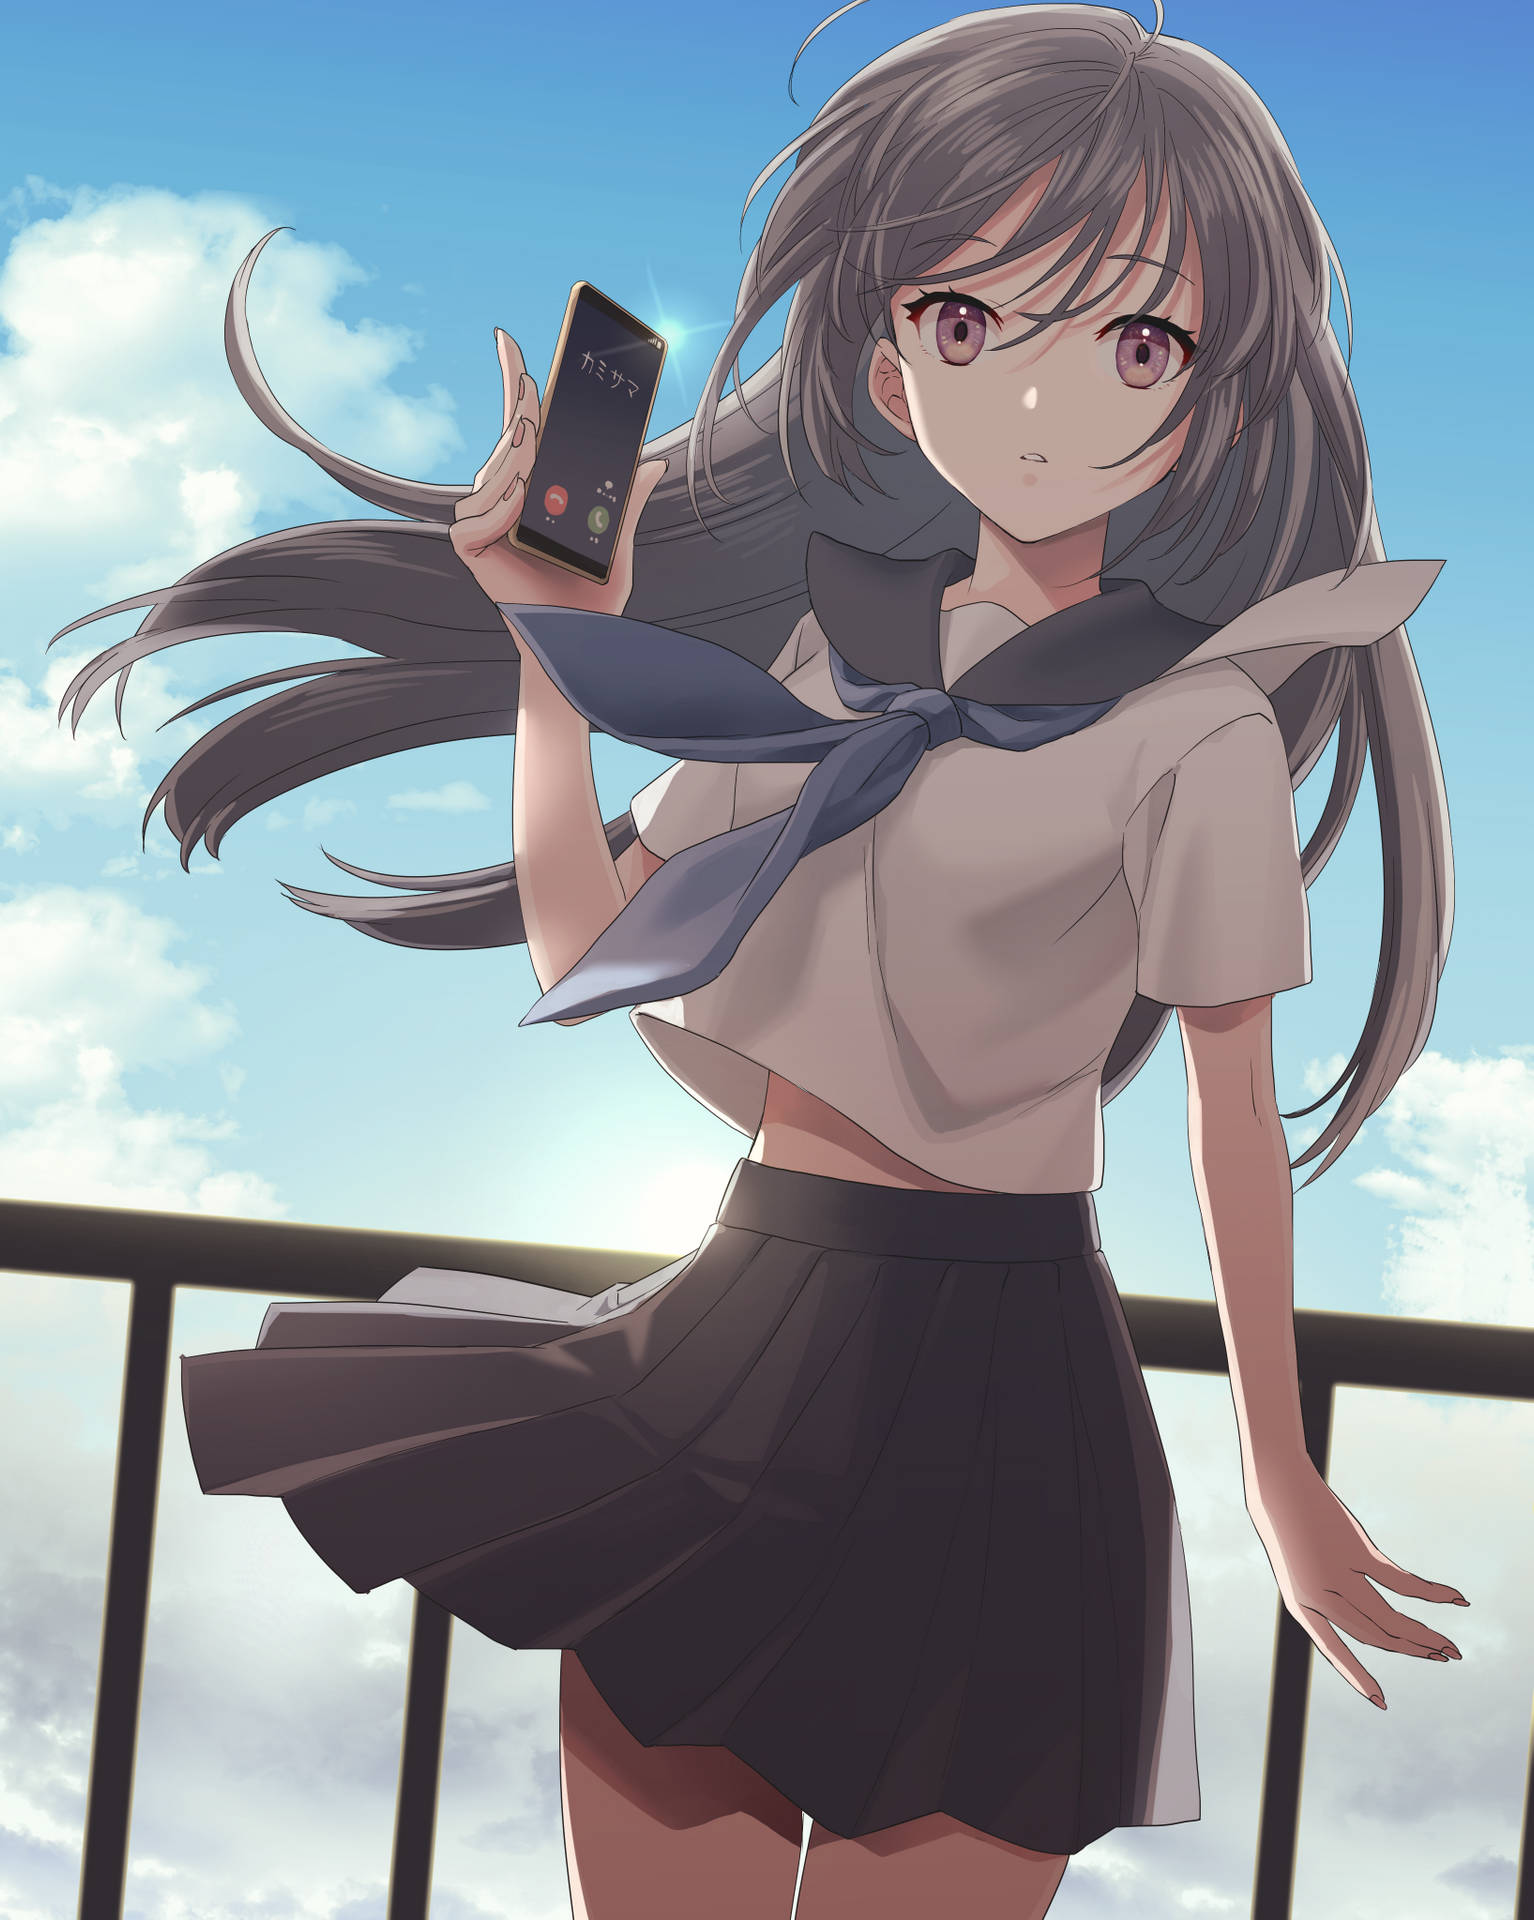 l will give you a collection of anime phone wallpapers